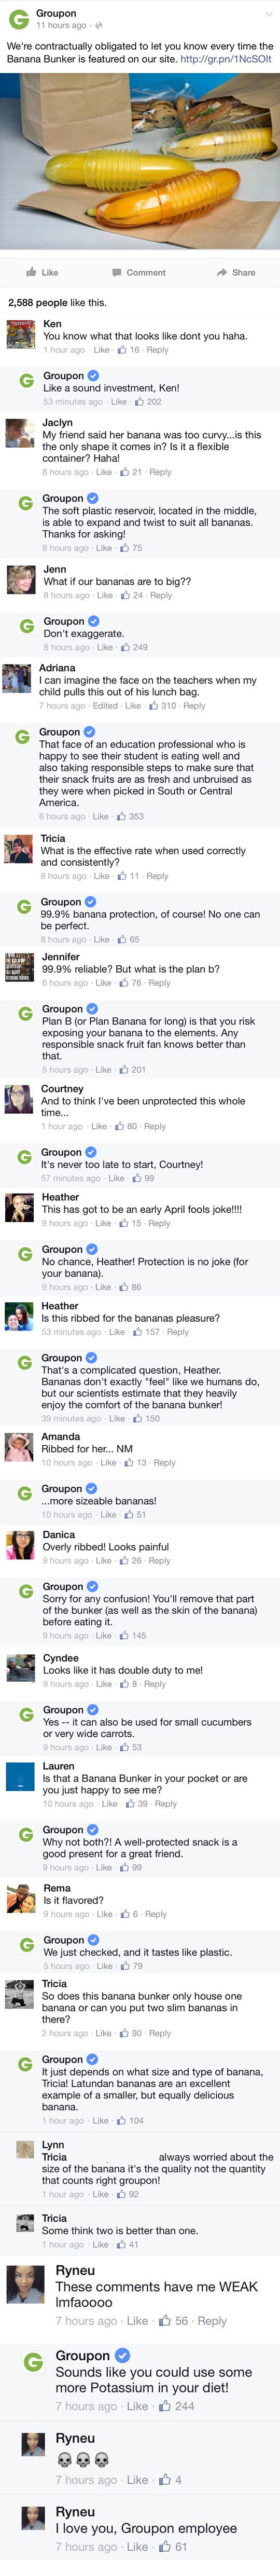 This+Employee+From+Groupon+Is+A+Genius